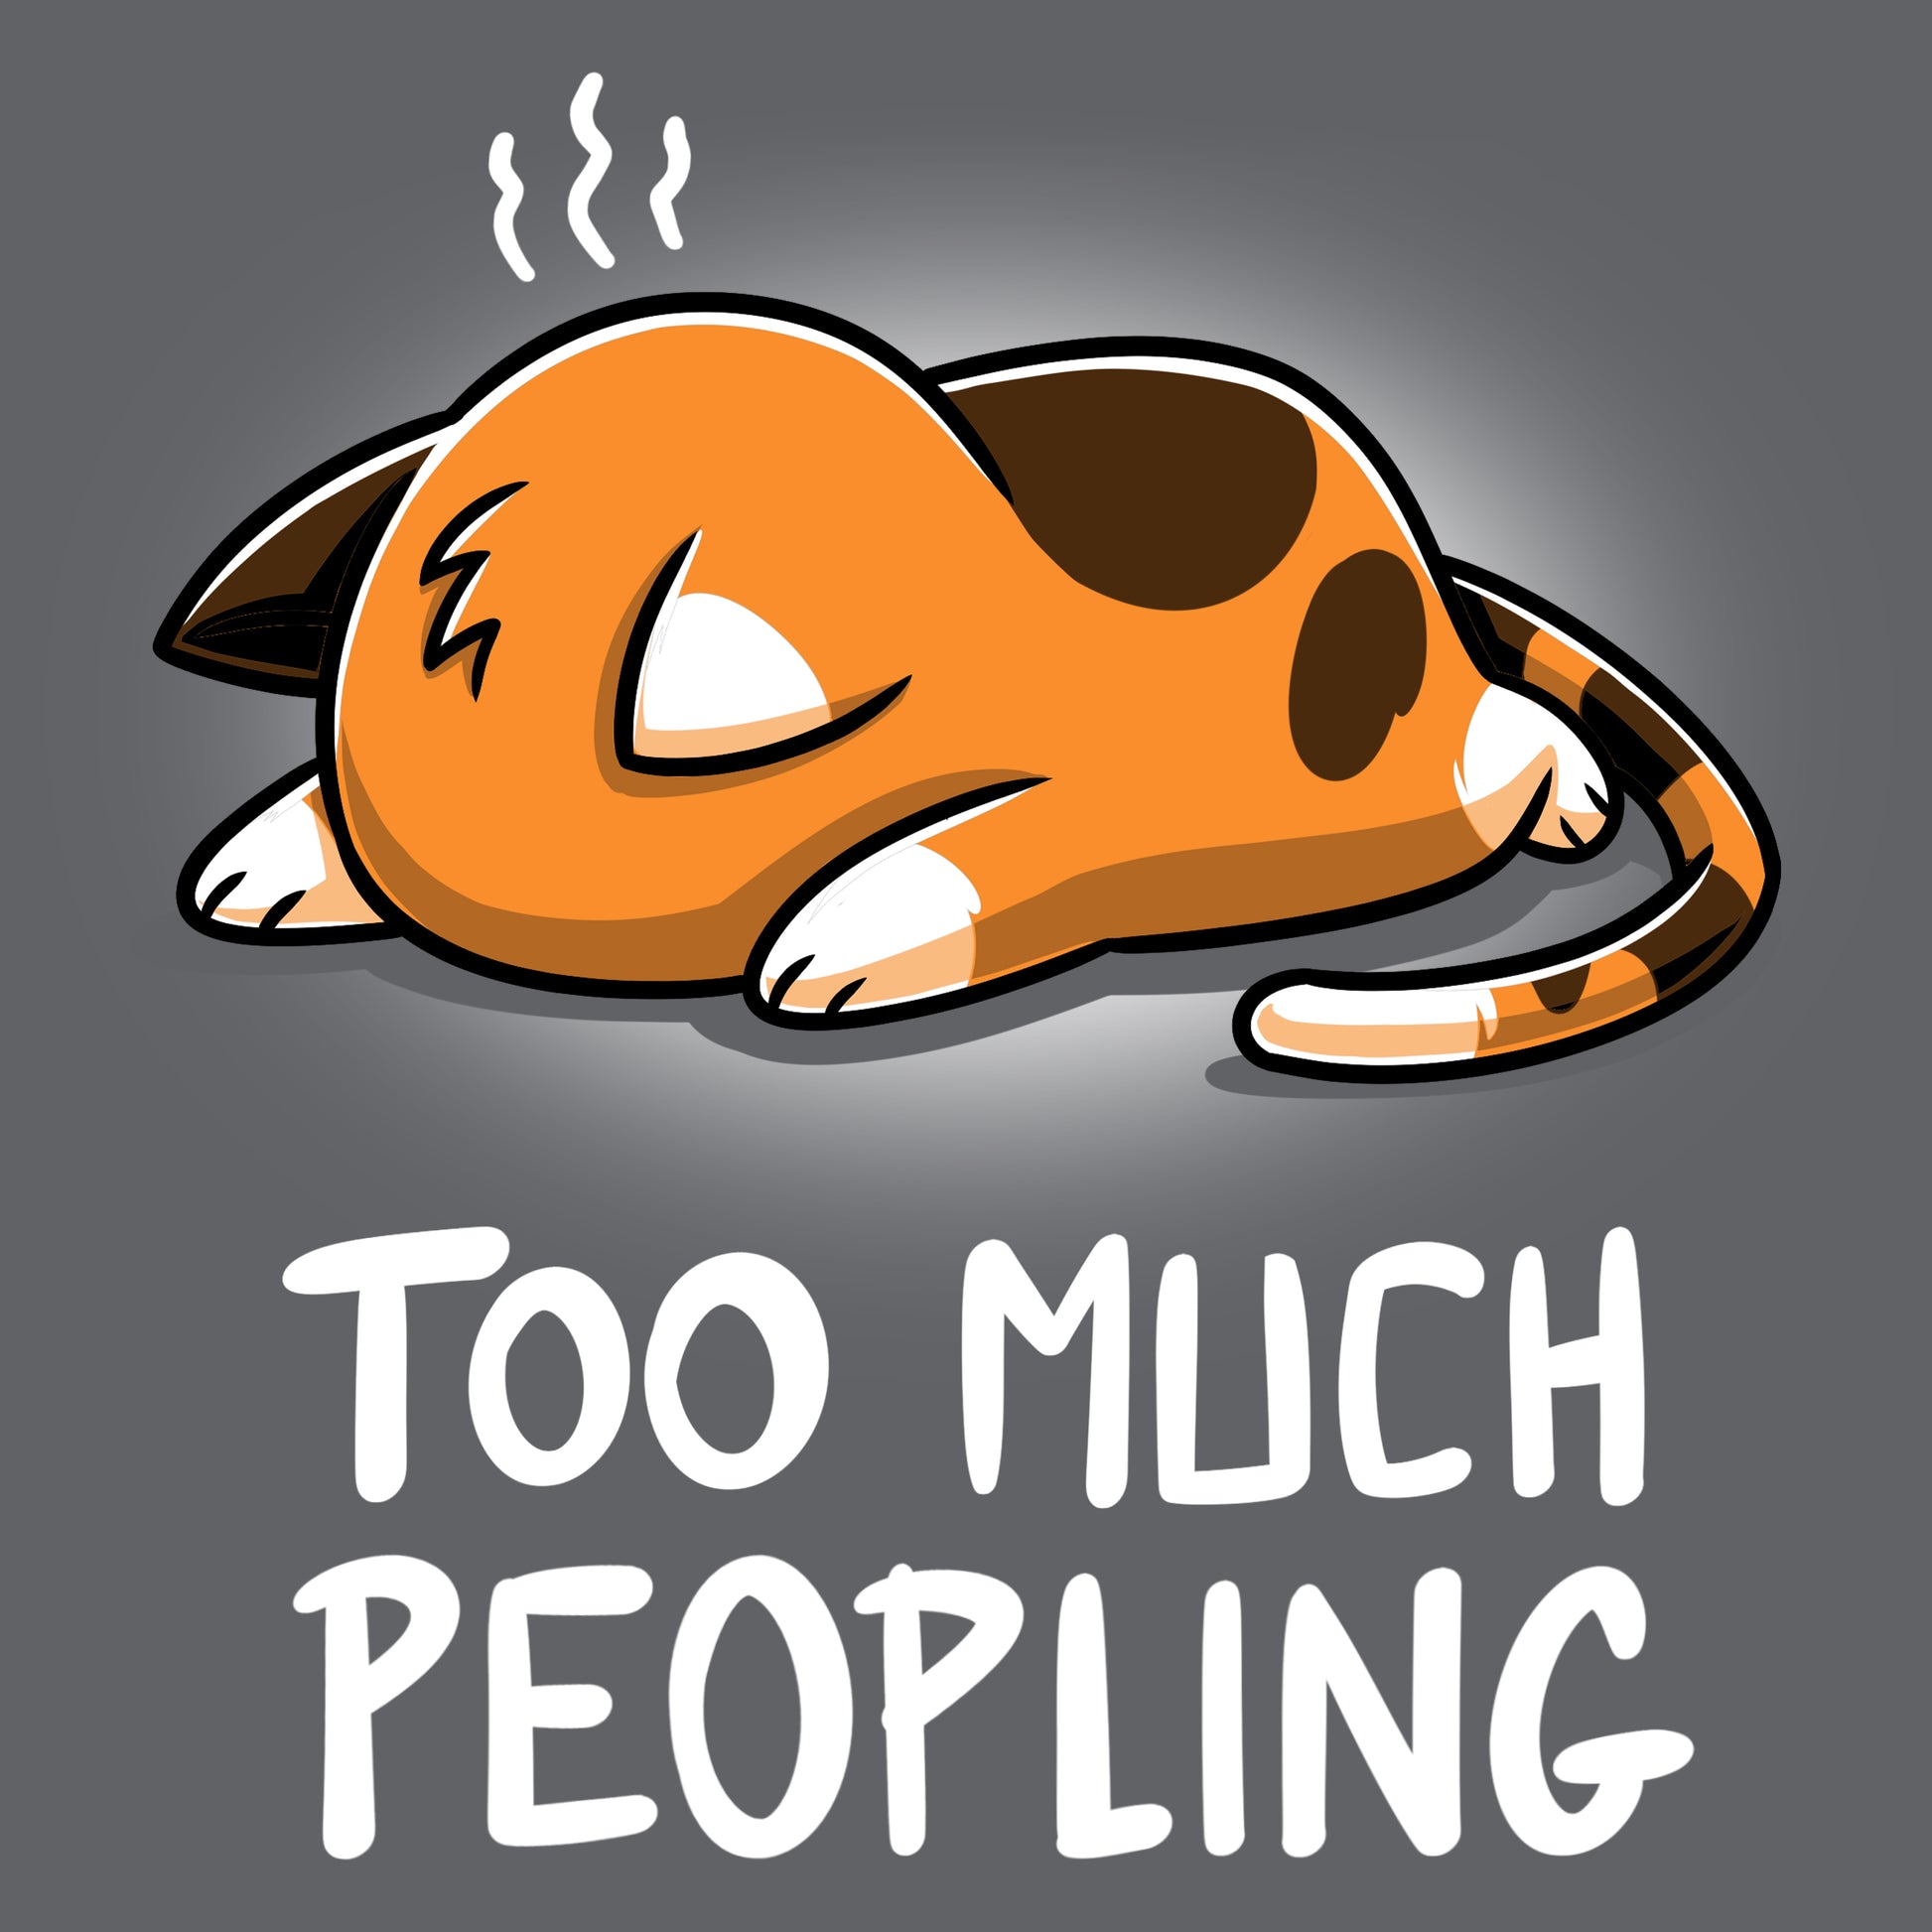 A cat recharging after wearing a TeeTurtle t-shirt called "Too Much Peopling.